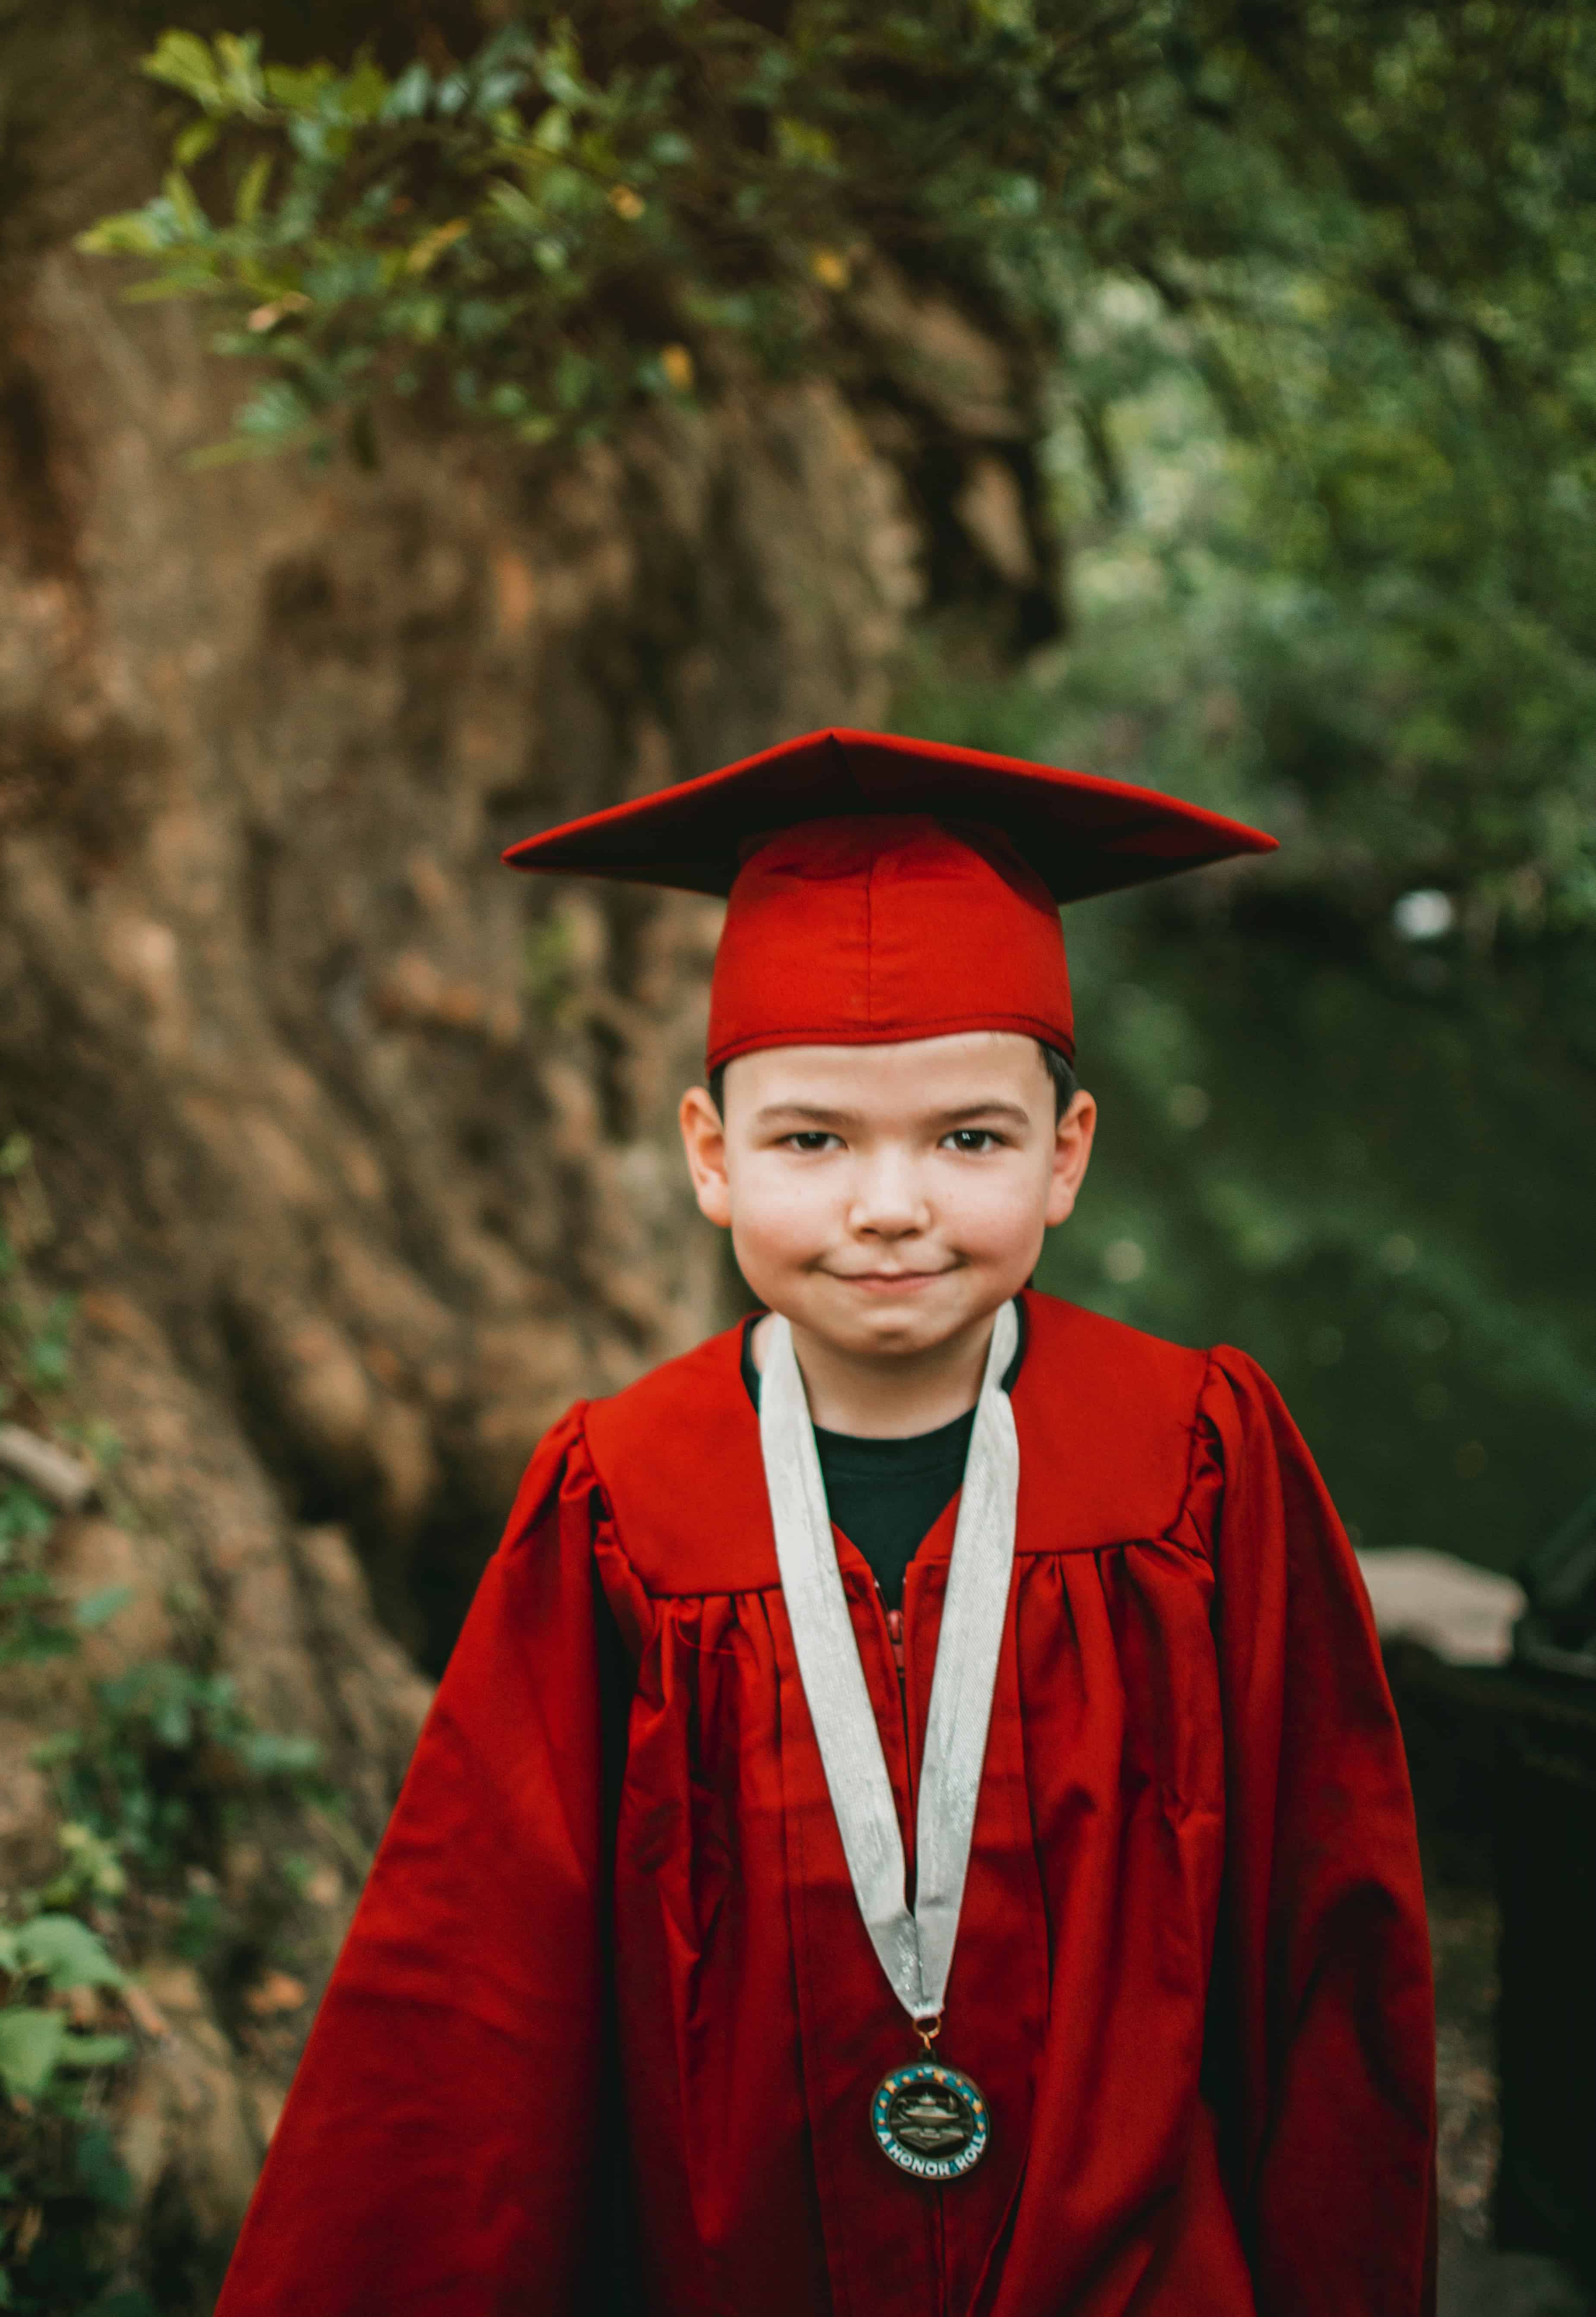 Proud young boy in graduation outfit by Gabriel tovar